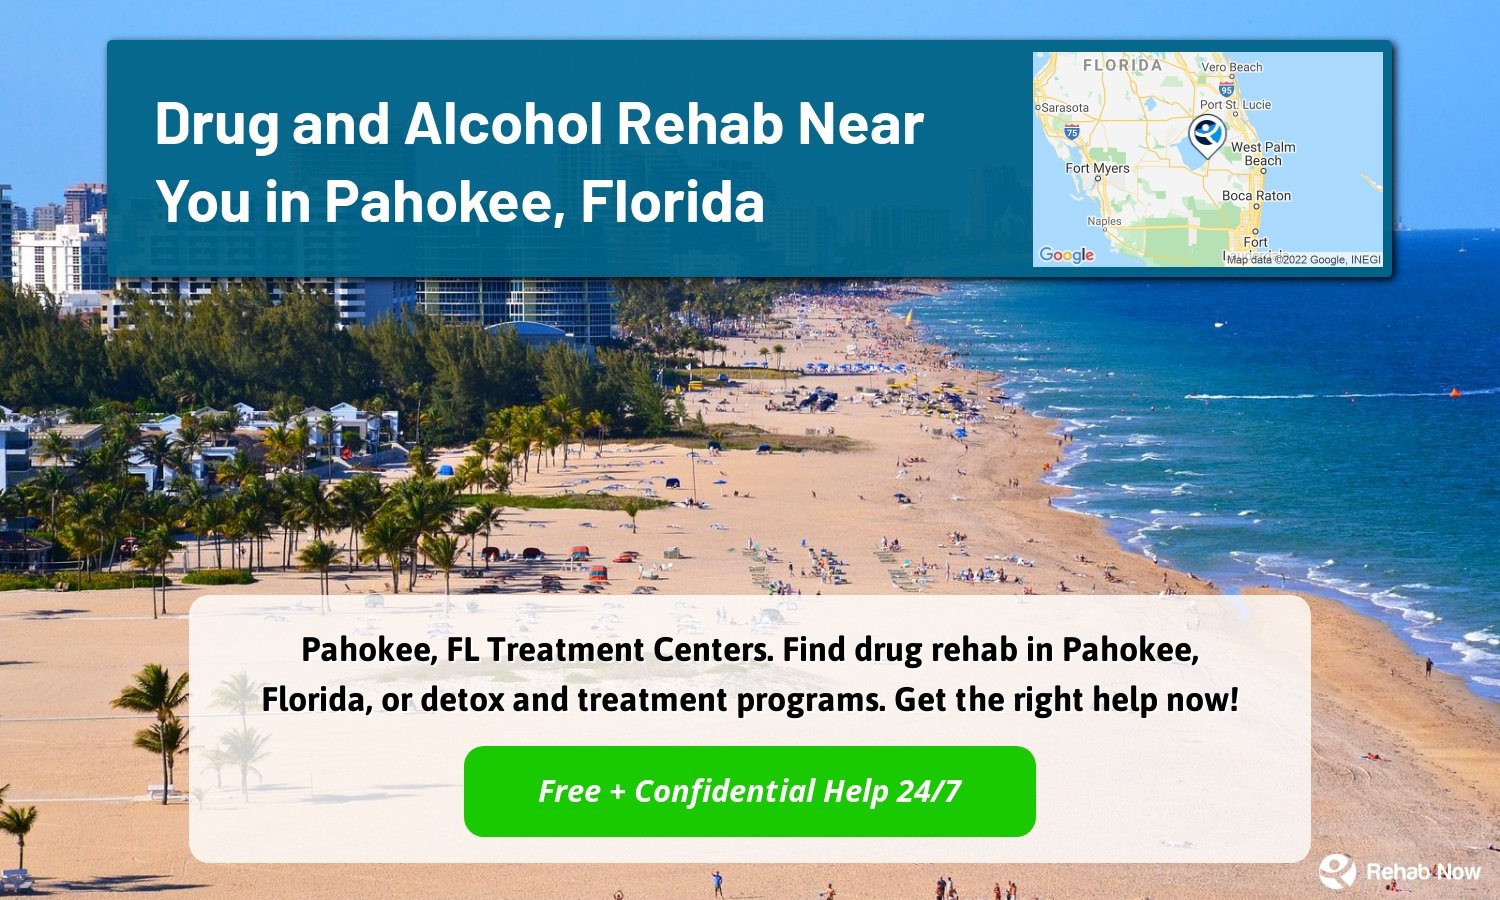 Pahokee, FL Treatment Centers. Find drug rehab in Pahokee, Florida, or detox and treatment programs. Get the right help now!